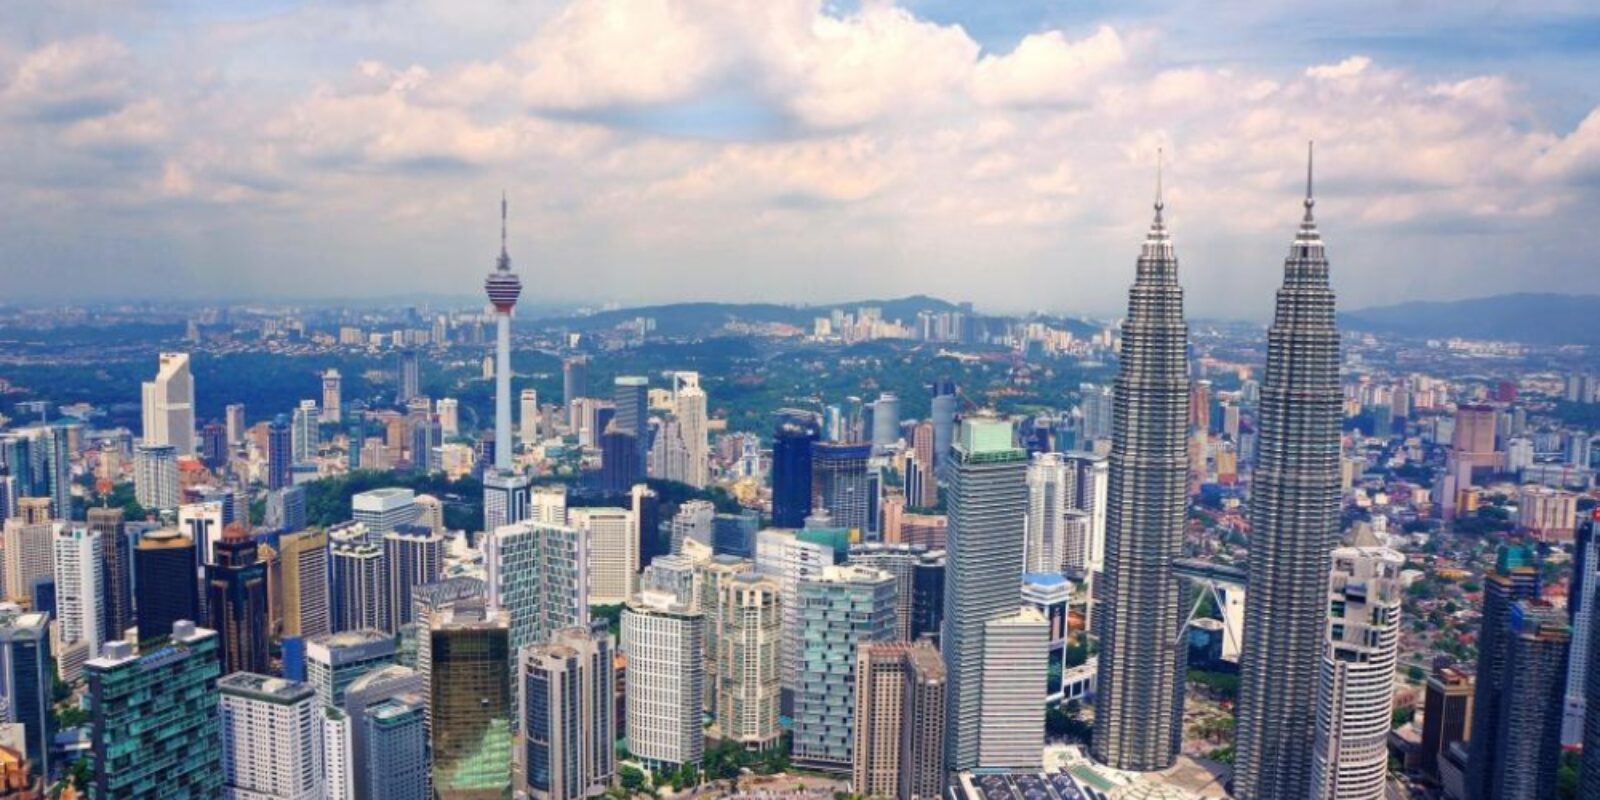 An image of the Kuala Lumpur skyline for an article about "senior vacation to Kuala Lumpur."